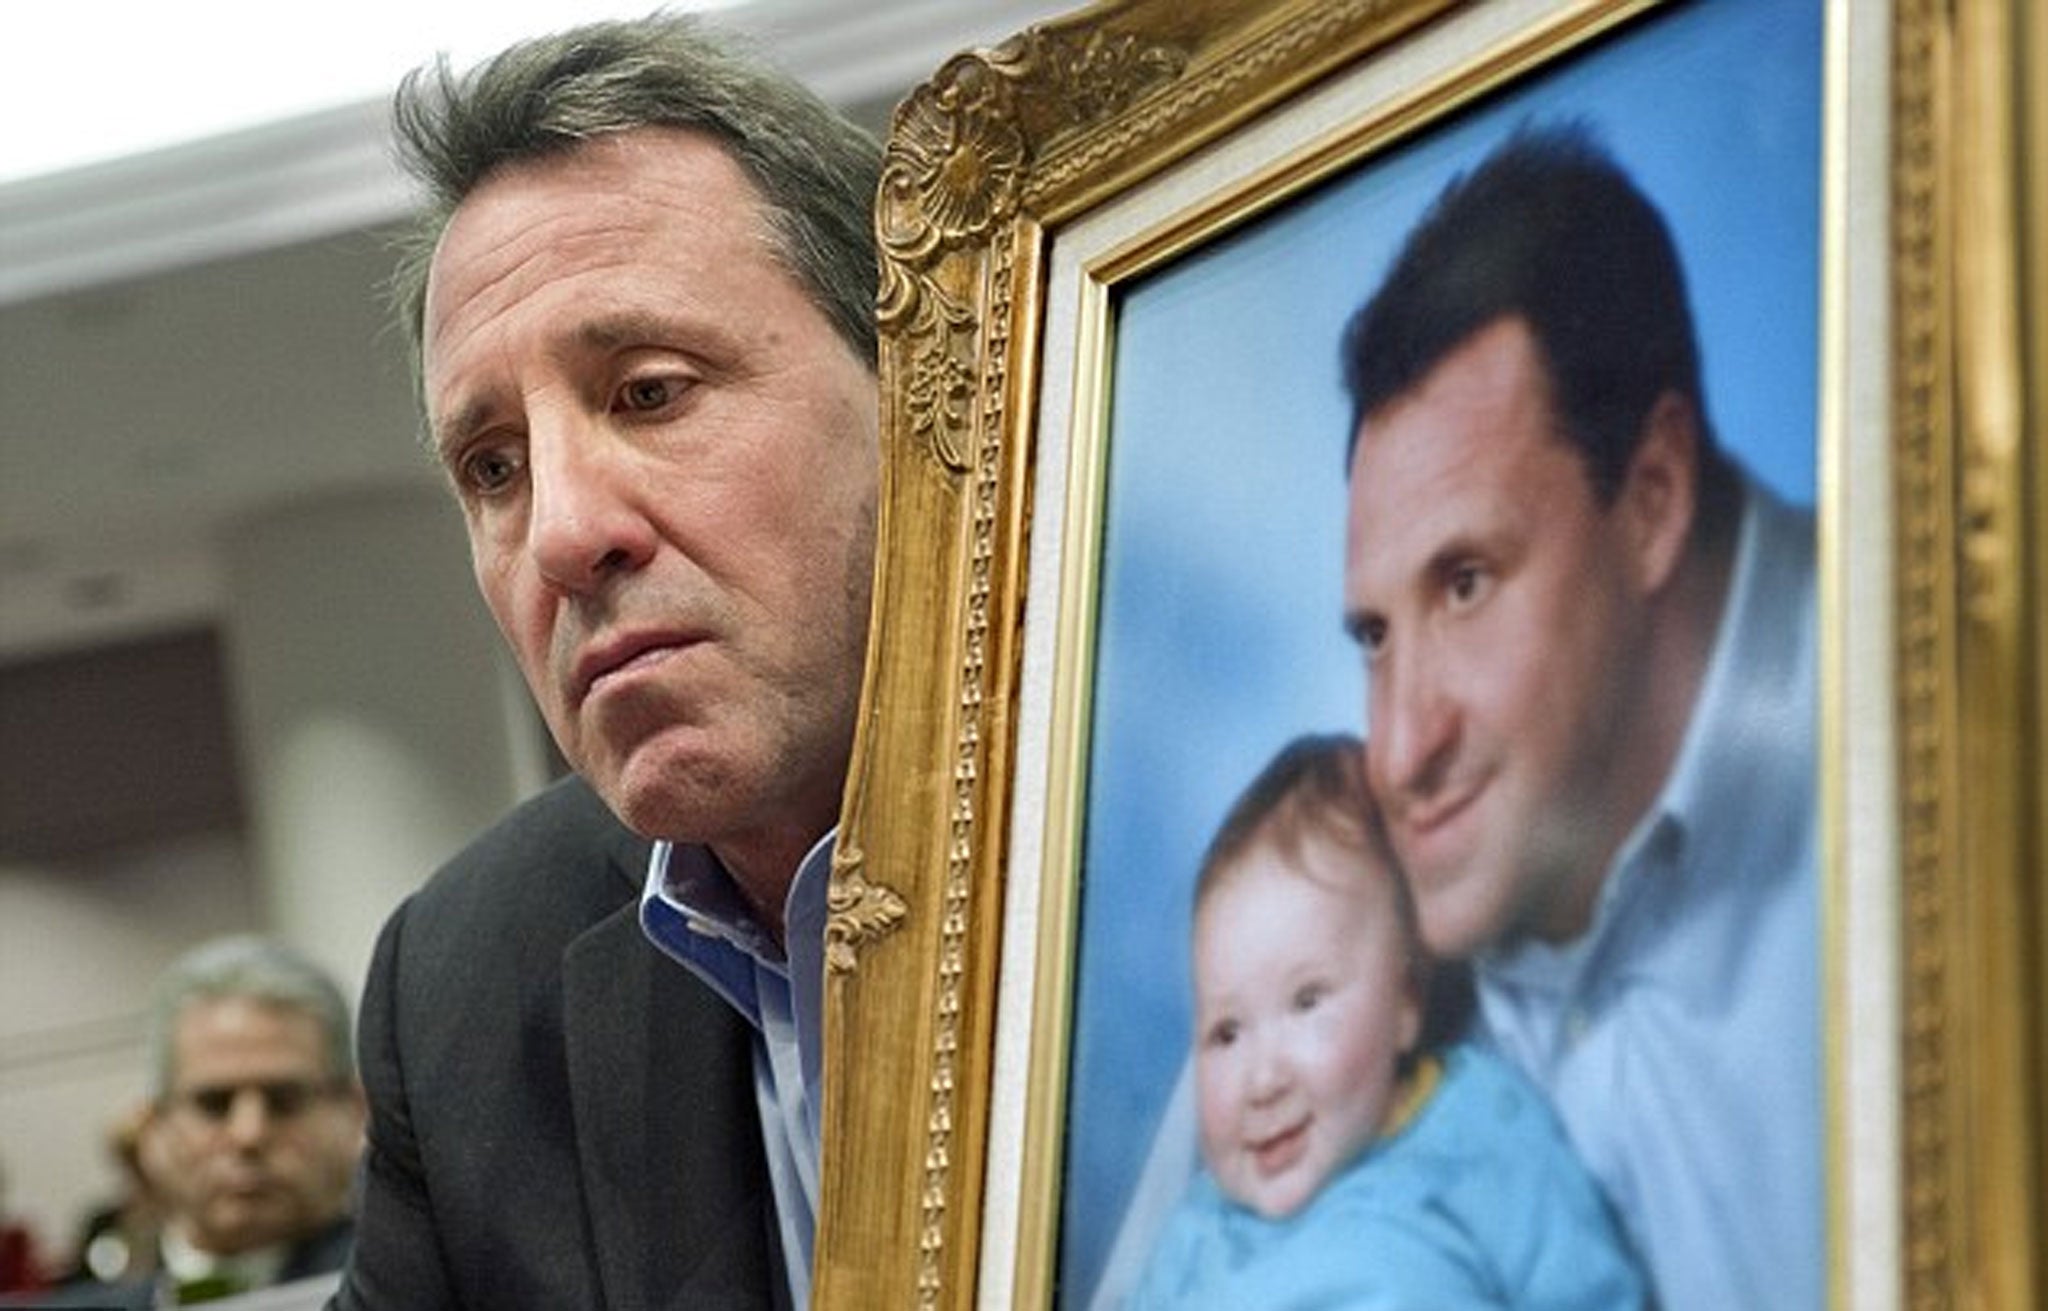 Neil Heslin held a large framed photograph of his murdered son Jesse as he spoke